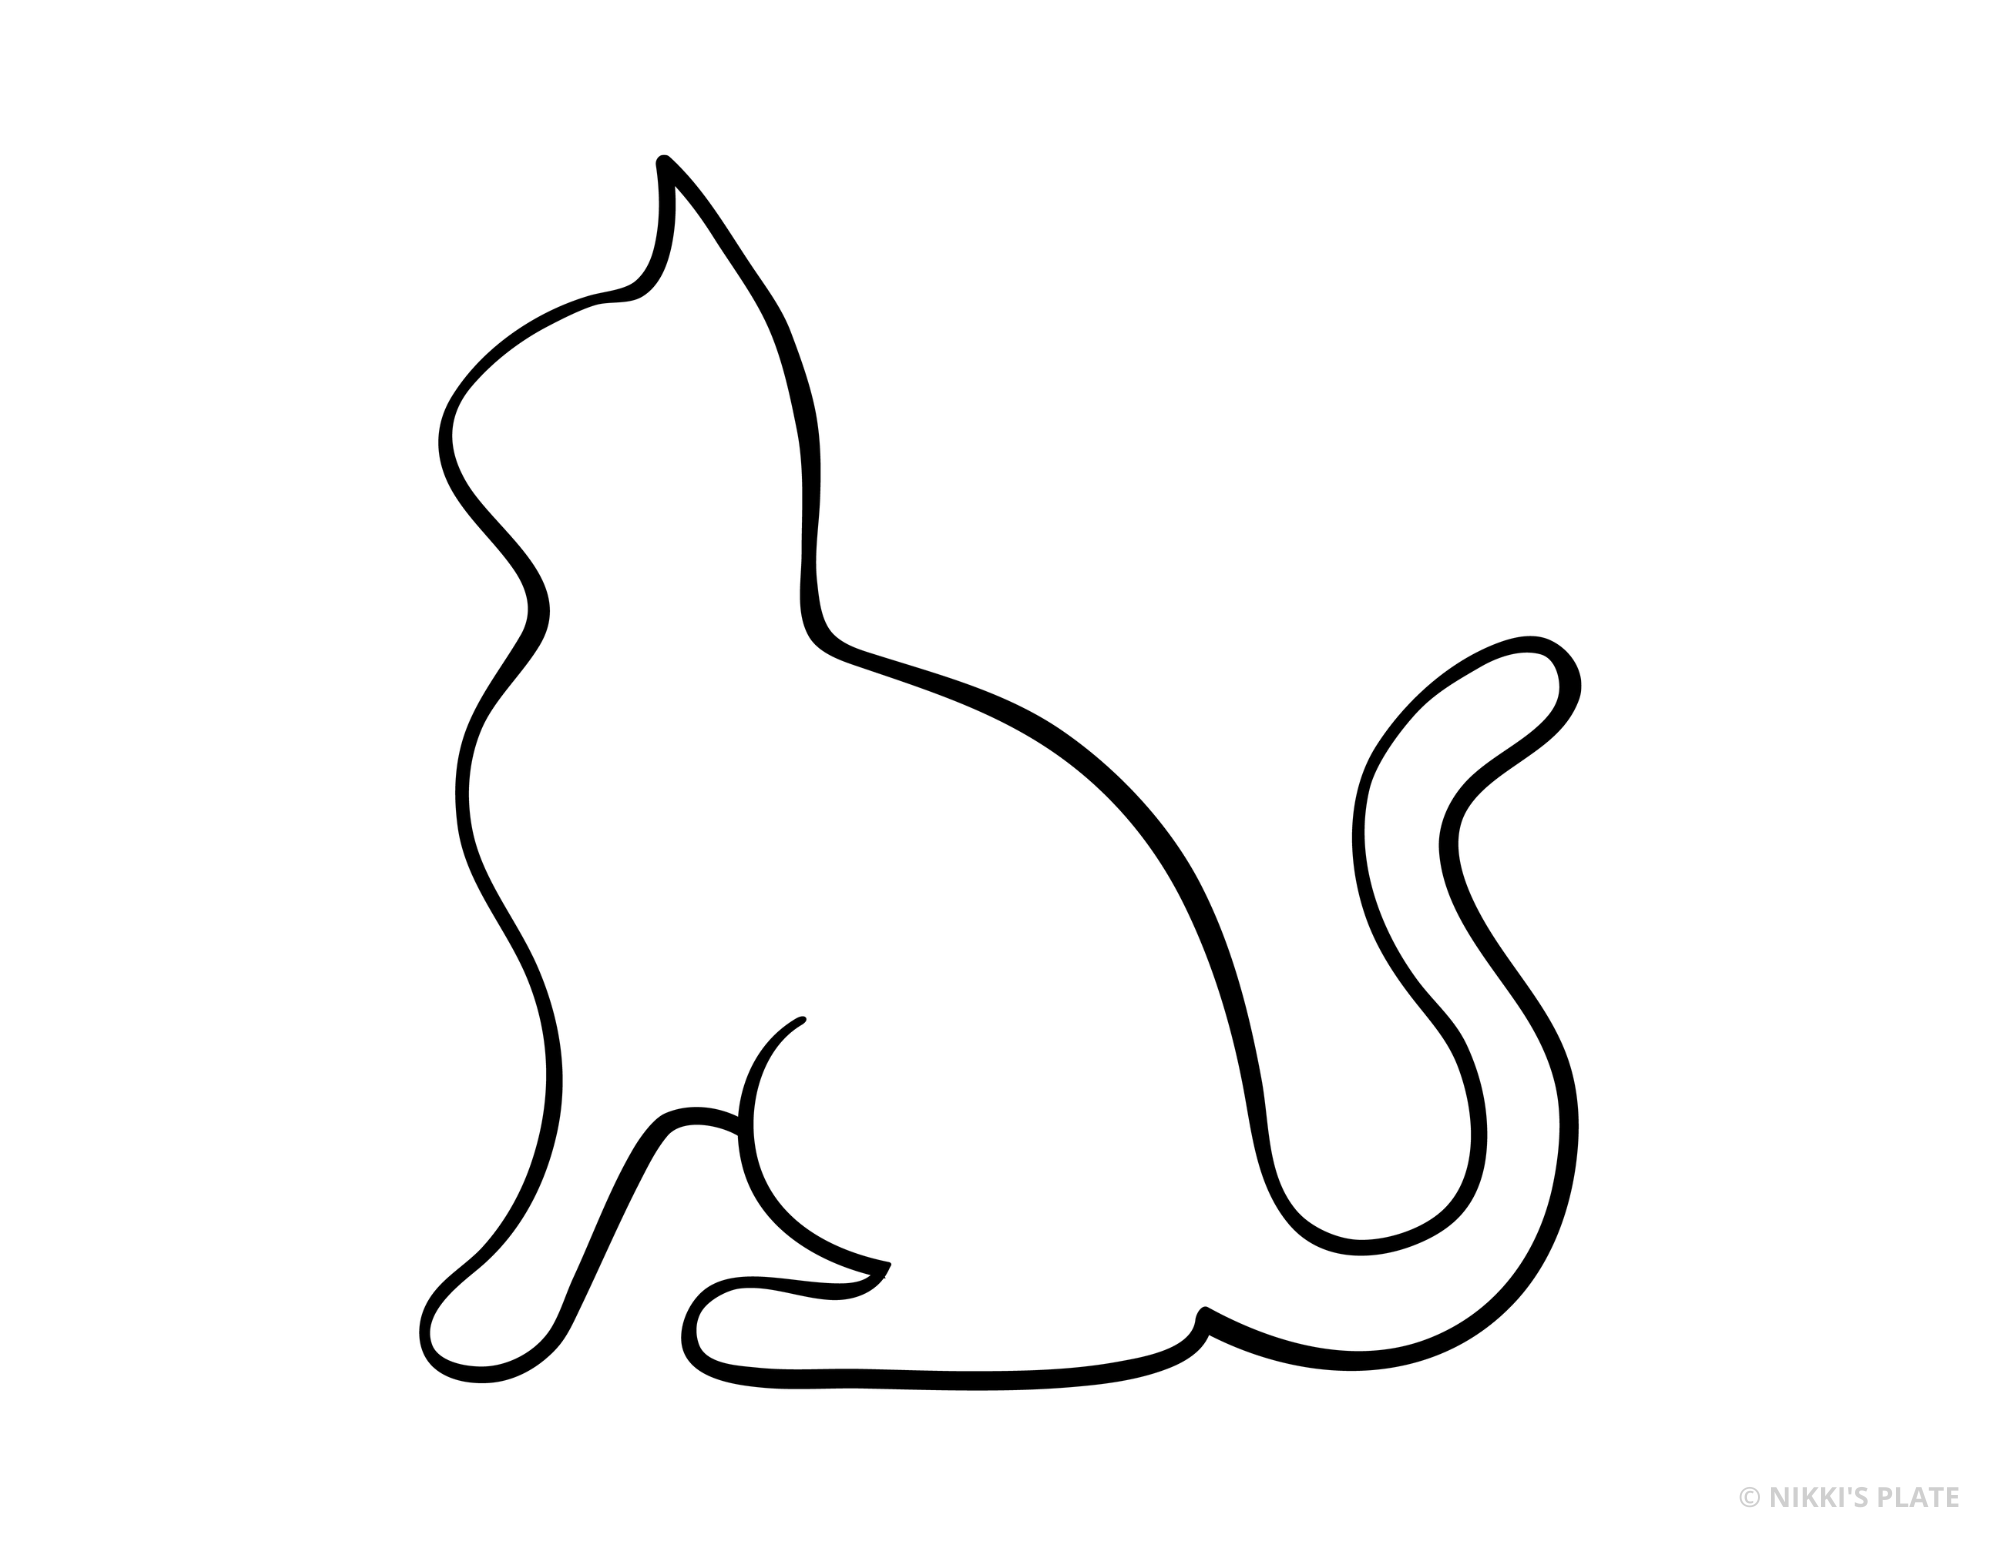 20 Cat Pumpkin Carving Patterns (FREE PRINTABLE); looking for cat pumpkin carving ideas? Look no further with these free cat pumpkin carving stencils! Download and print!